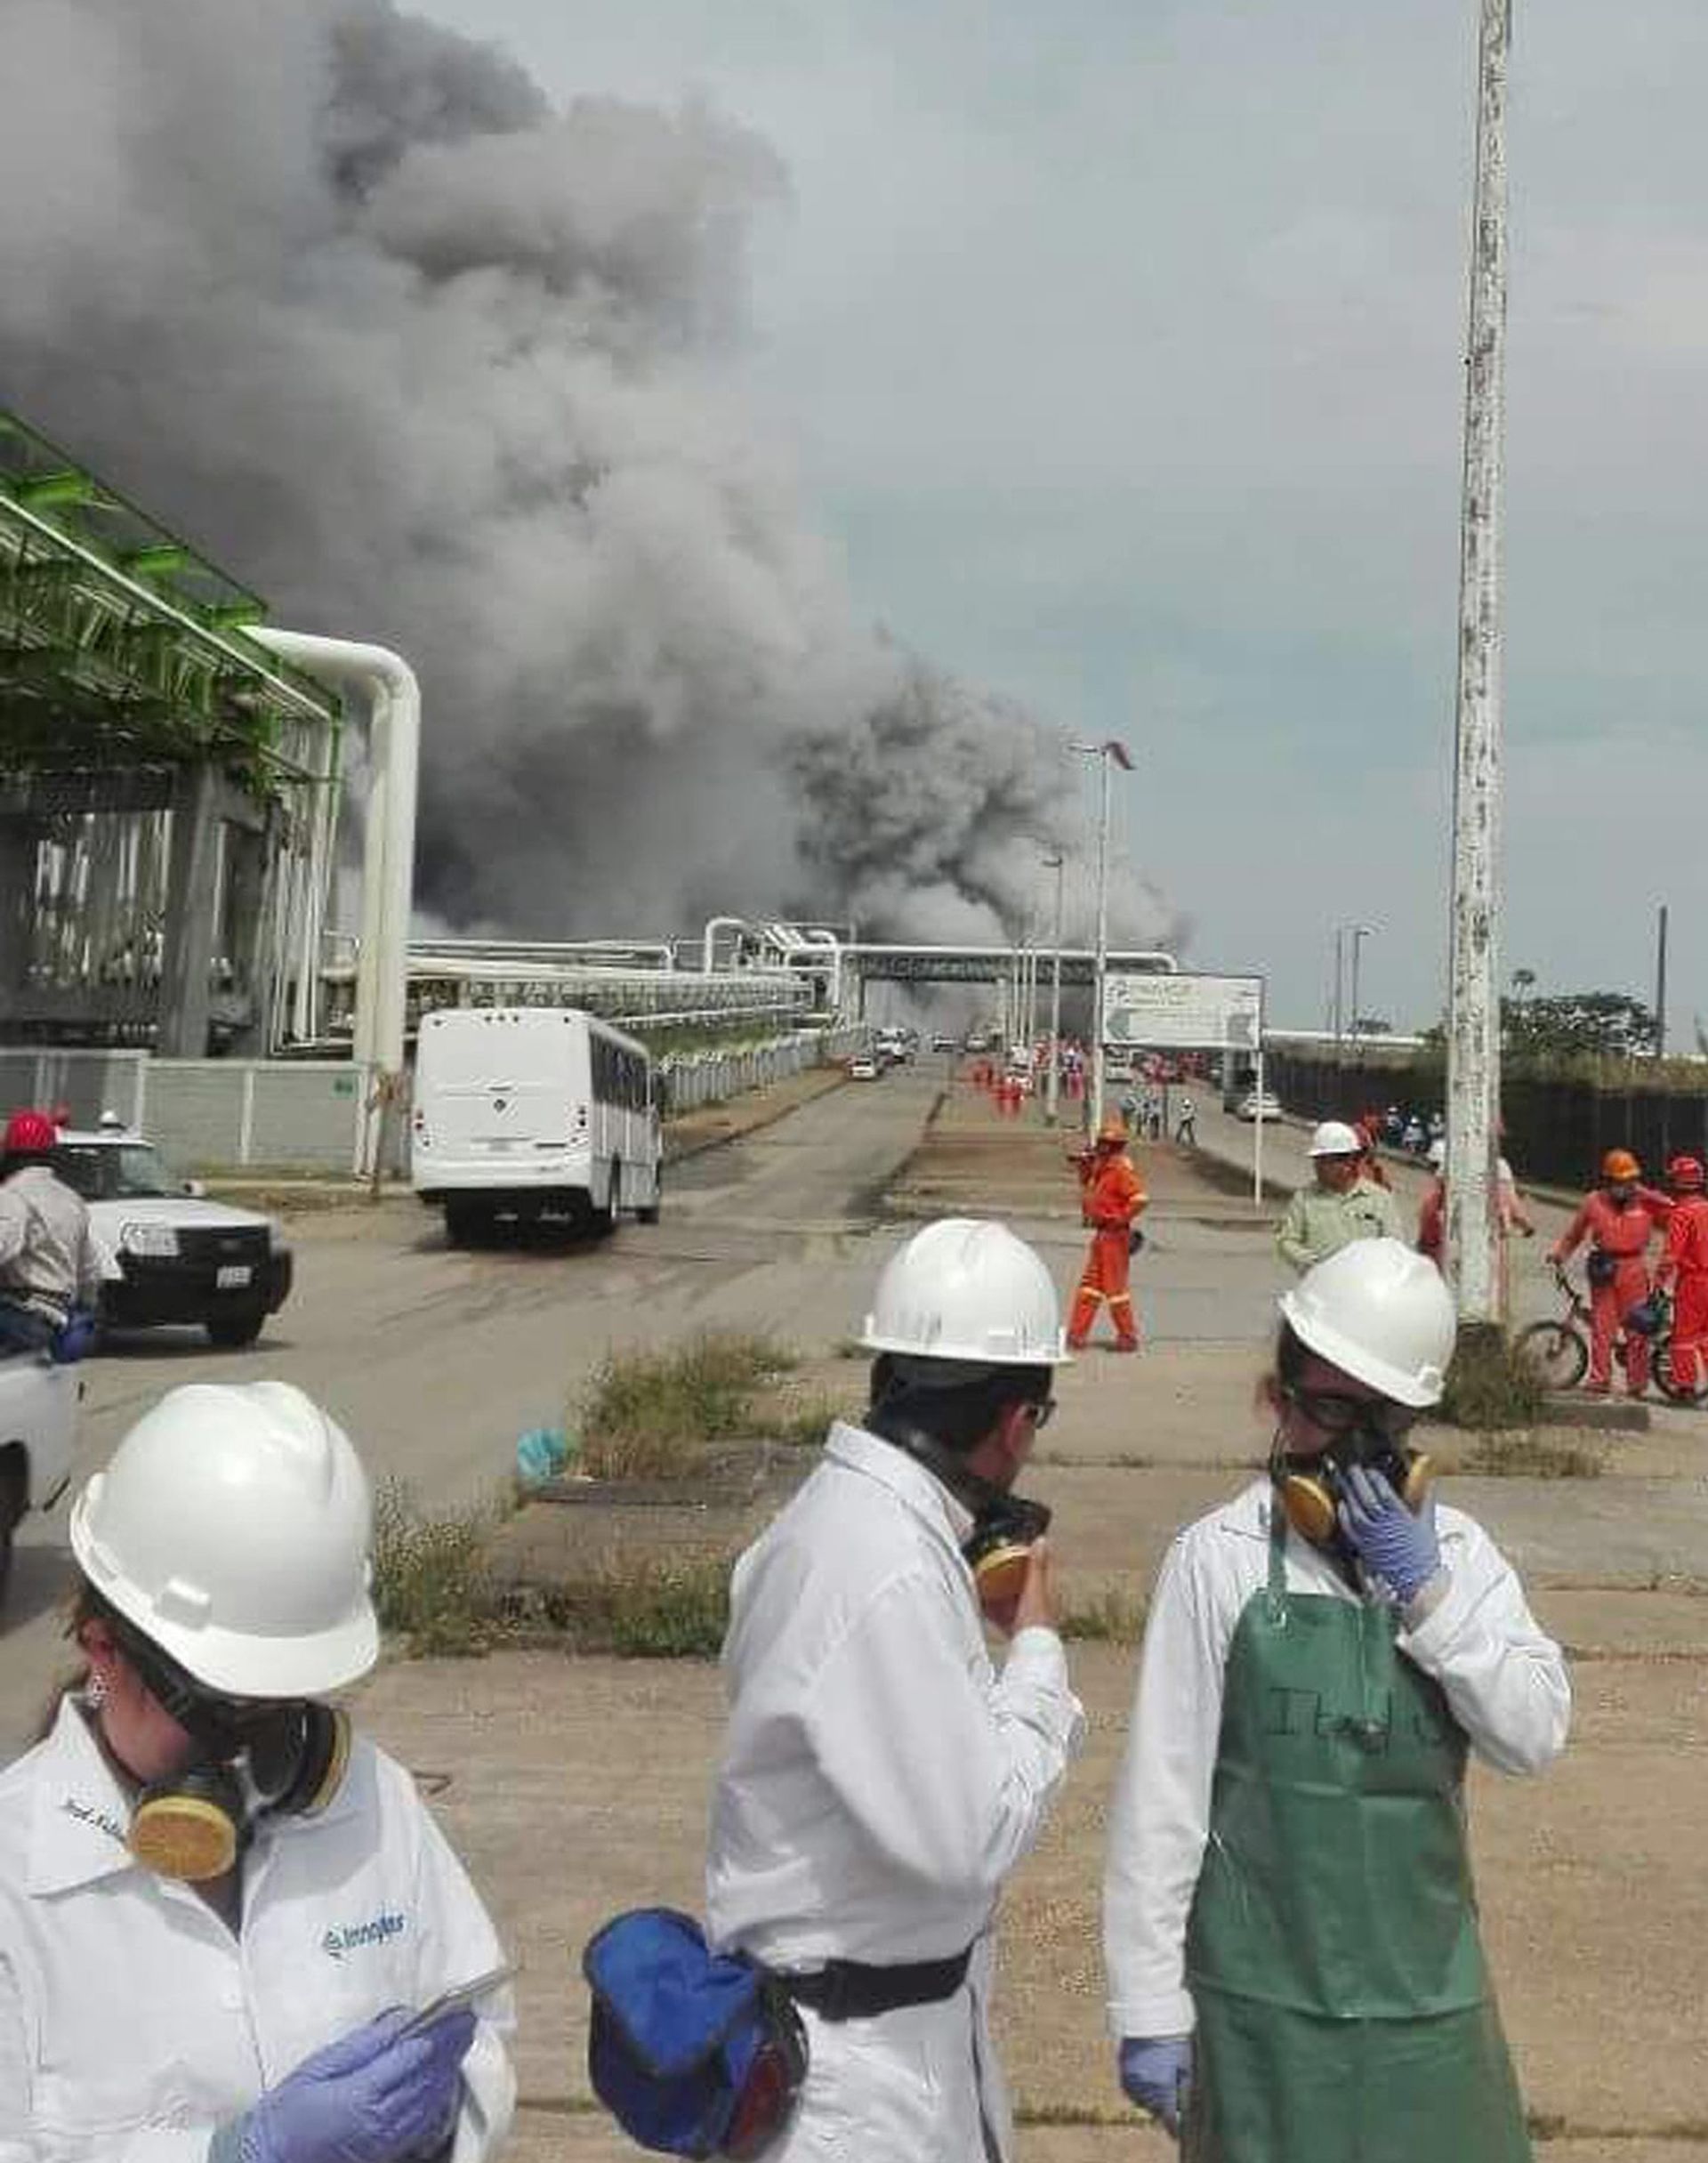 epa05269604 A group of workers evacuates the premises of a Pemex petrochemical complex following a strong explosion, in Coatzacoalcos, Mexico, 20 April 2016. At least 30 people were injured on 20 April in a strong explosion at the petrochemical complex of the state-owned Petroleos Mexicanos (Pemex) in the port of Coatzacoalcos, in the eastern state of Veracruz, officials said. The explosion occurred around 15.30 local time (20.30 GMT), in the plant Clorados 3 of the Mexican Petrochemical Vinyl (PMV) known as Pajarito, a joint venture between Mexican petrochemicals consortium Mexichem and state oil firm Pemex, media said. Authorities issued an alert to the general population of Coatzacoalcos to refrain from leaving their homes due to the presence in the air of chemicals that could cause skin burns.  EPA/STRINGER -- BEST QUALITY AVAILABLE